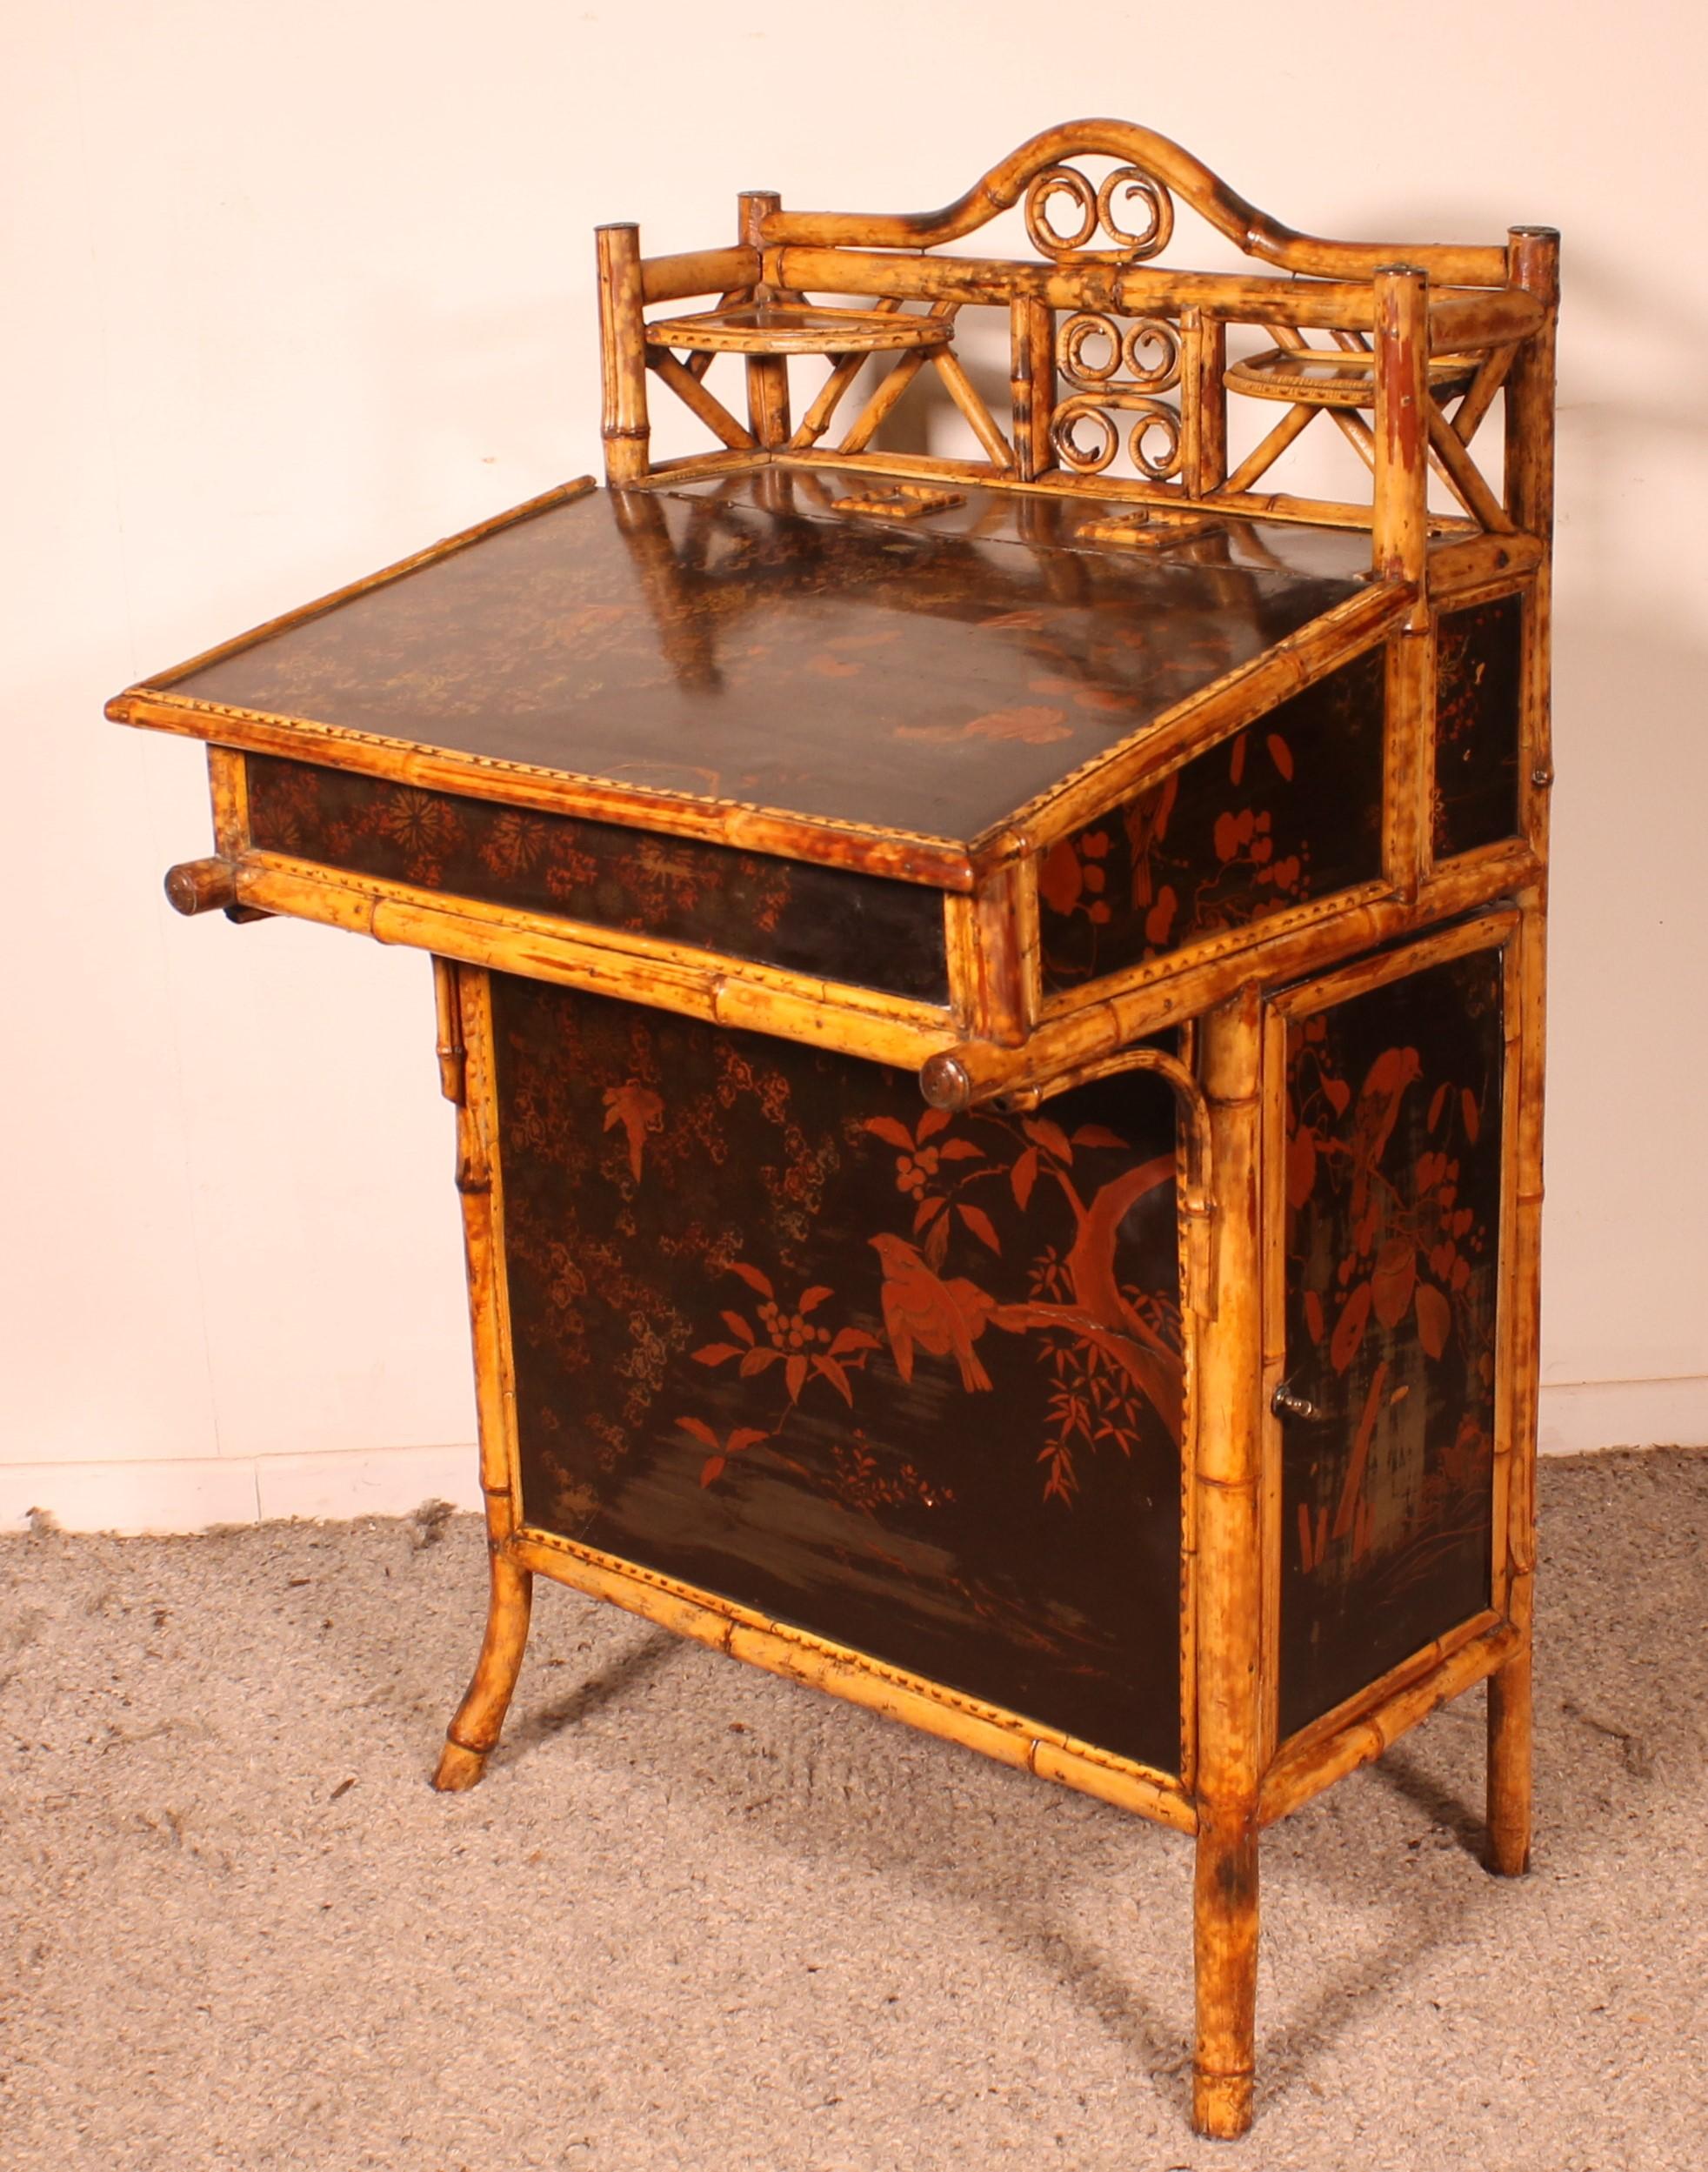 Secretary/davenport In Bamboo And Lacquer With Asian Decor - 19th Century For Sale 8